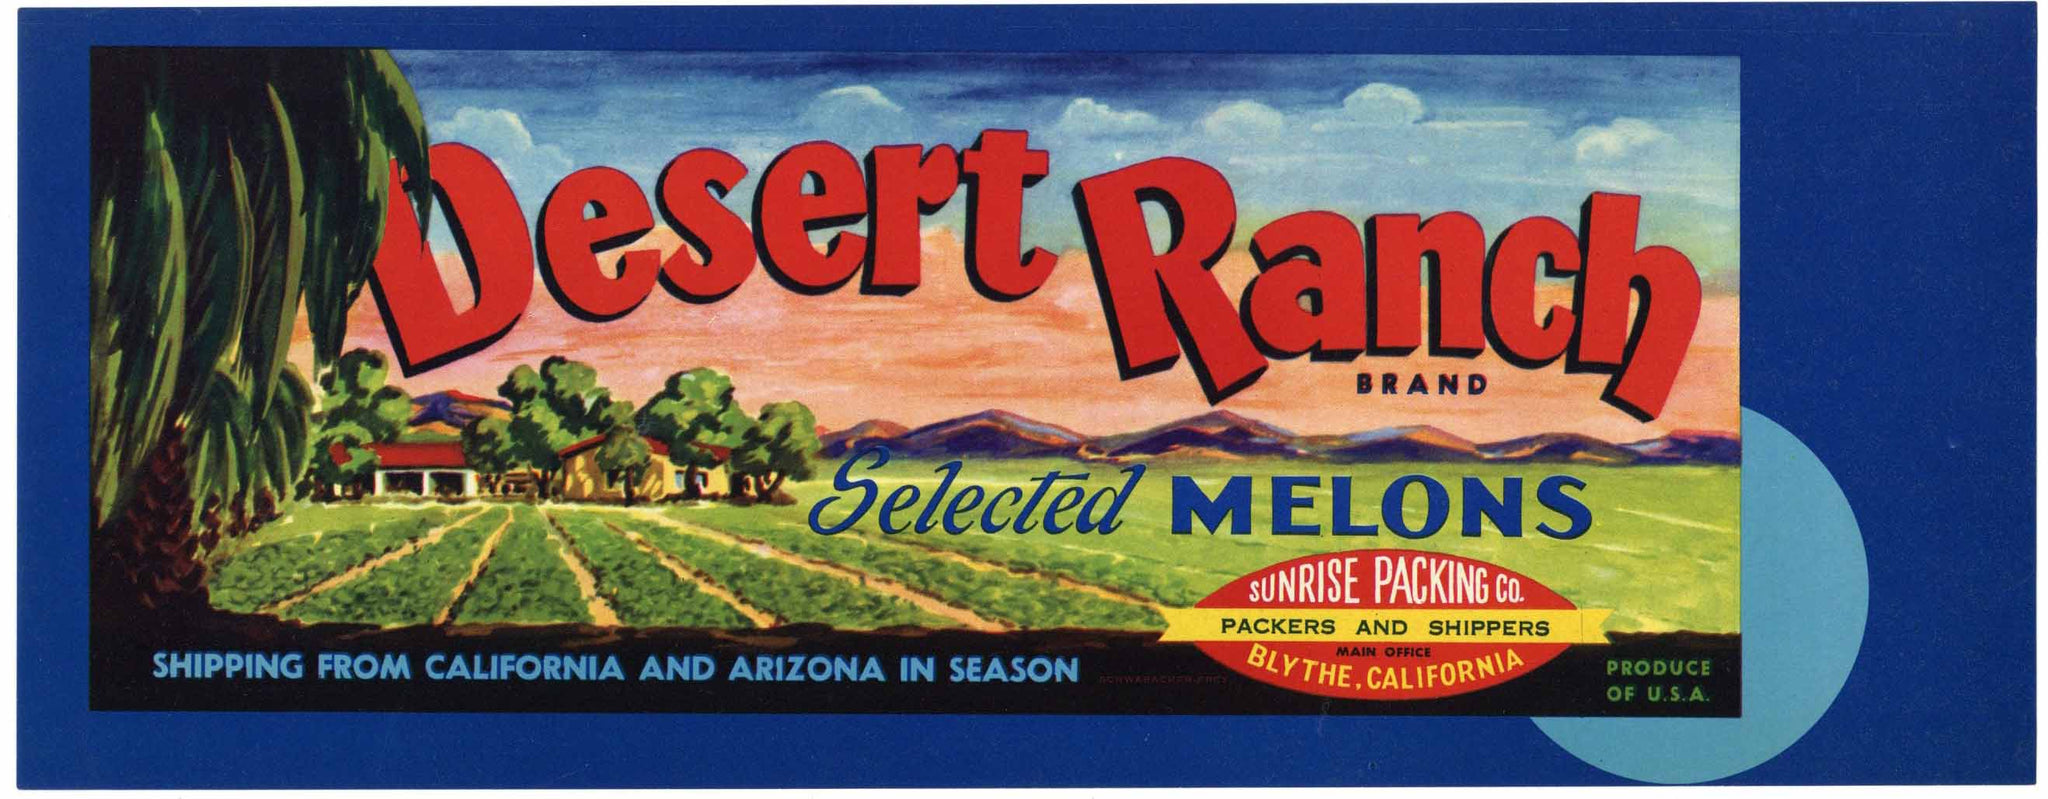 Desert Ranch Brand Vintage Imperial Valley Melon Crate Label, large